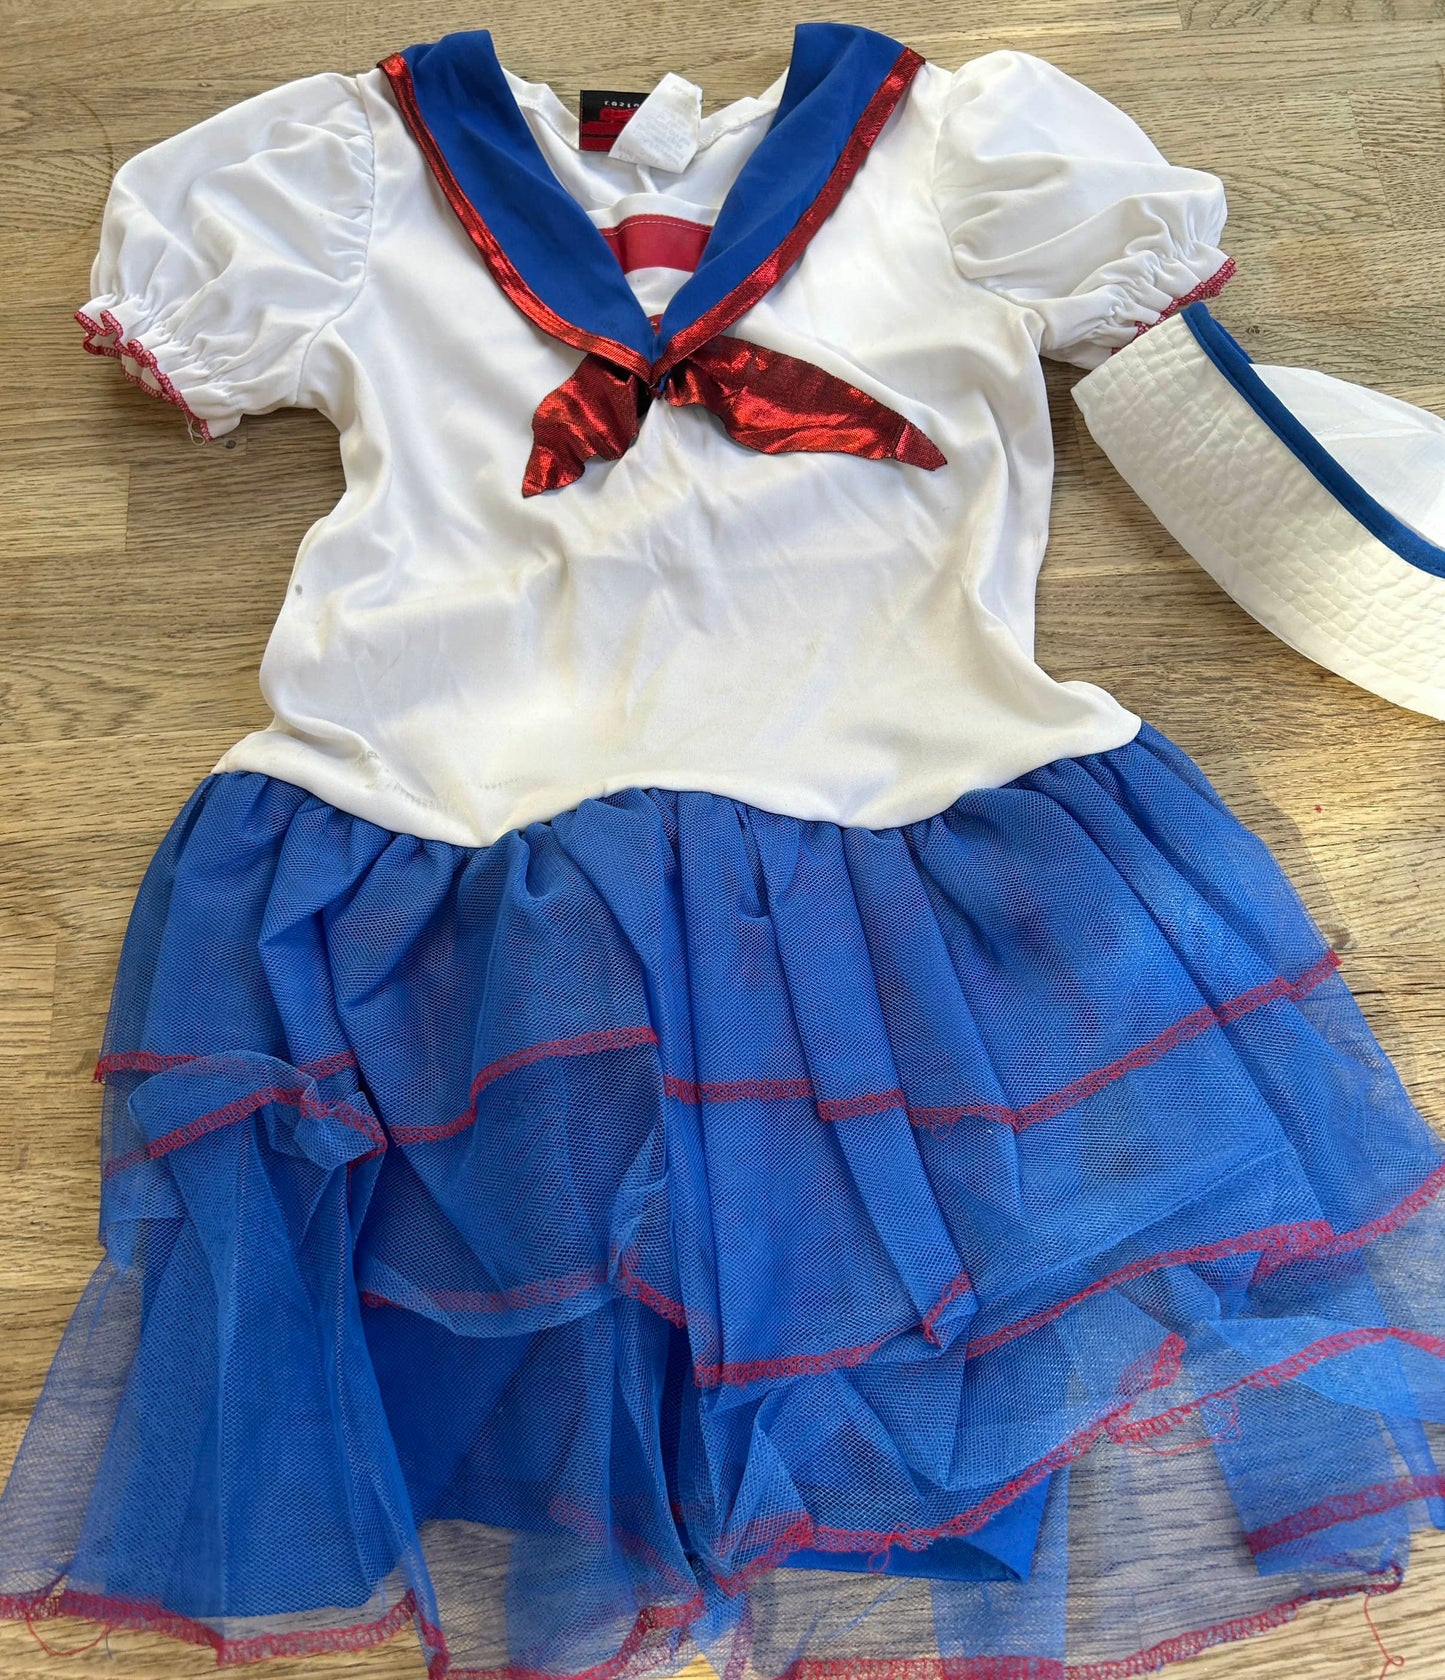 Spirit - Kids Costume - Sweetheart Sailor Costume (Pre-Loved) Size Small/6